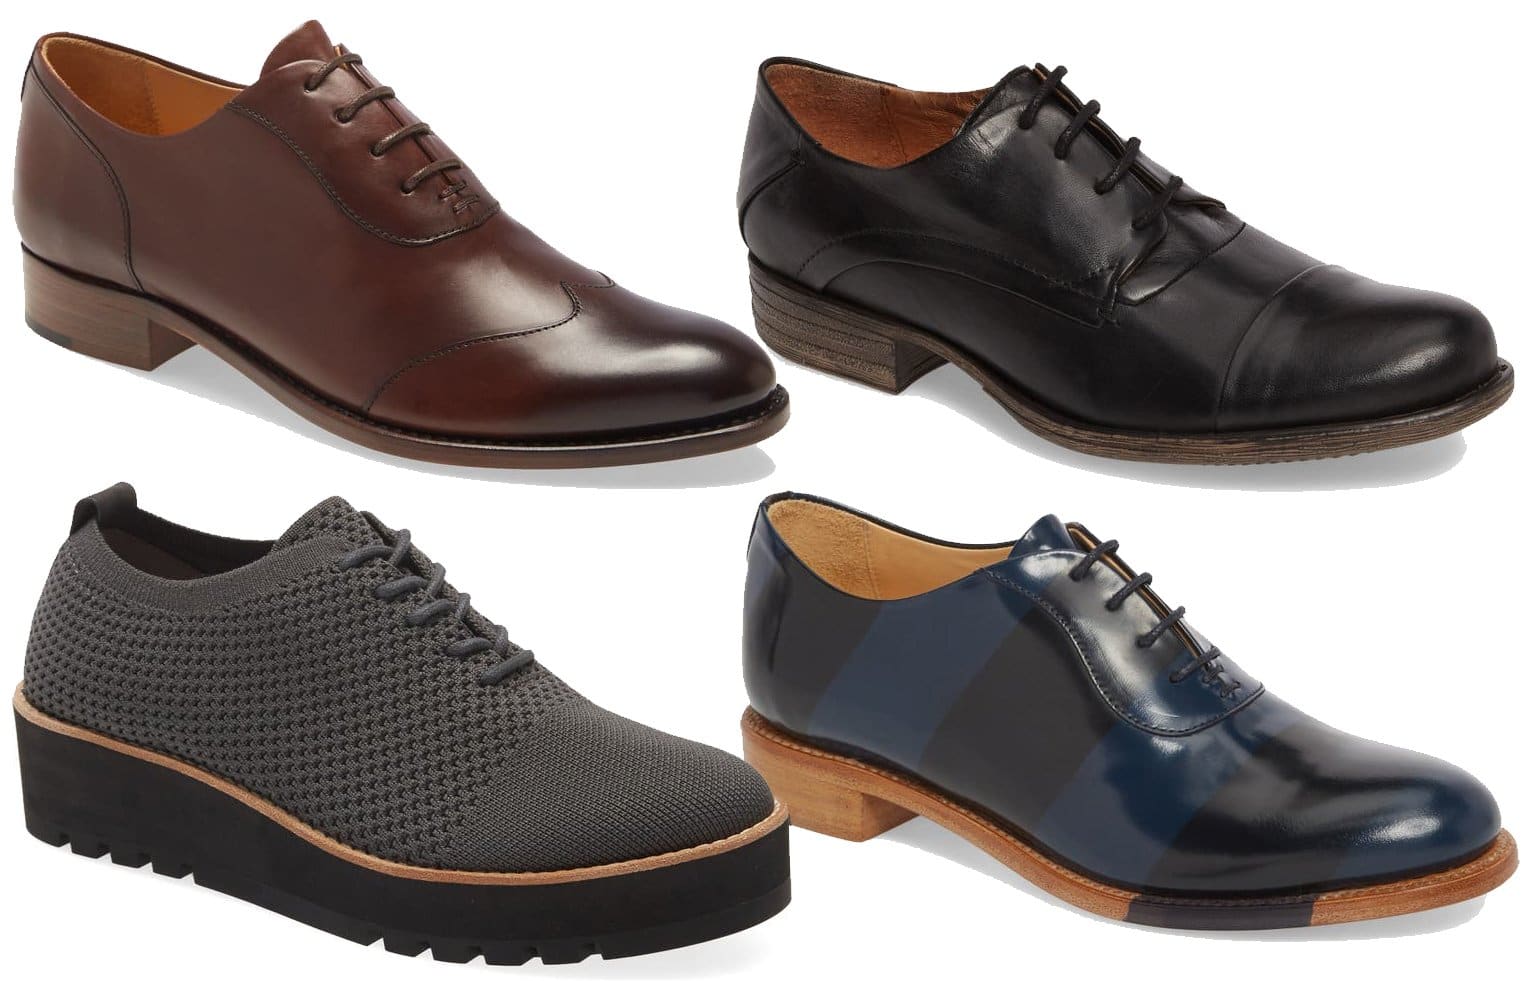 Aside from the usual neutrals, oxford shoes now come in an array of colors, prints, and materials